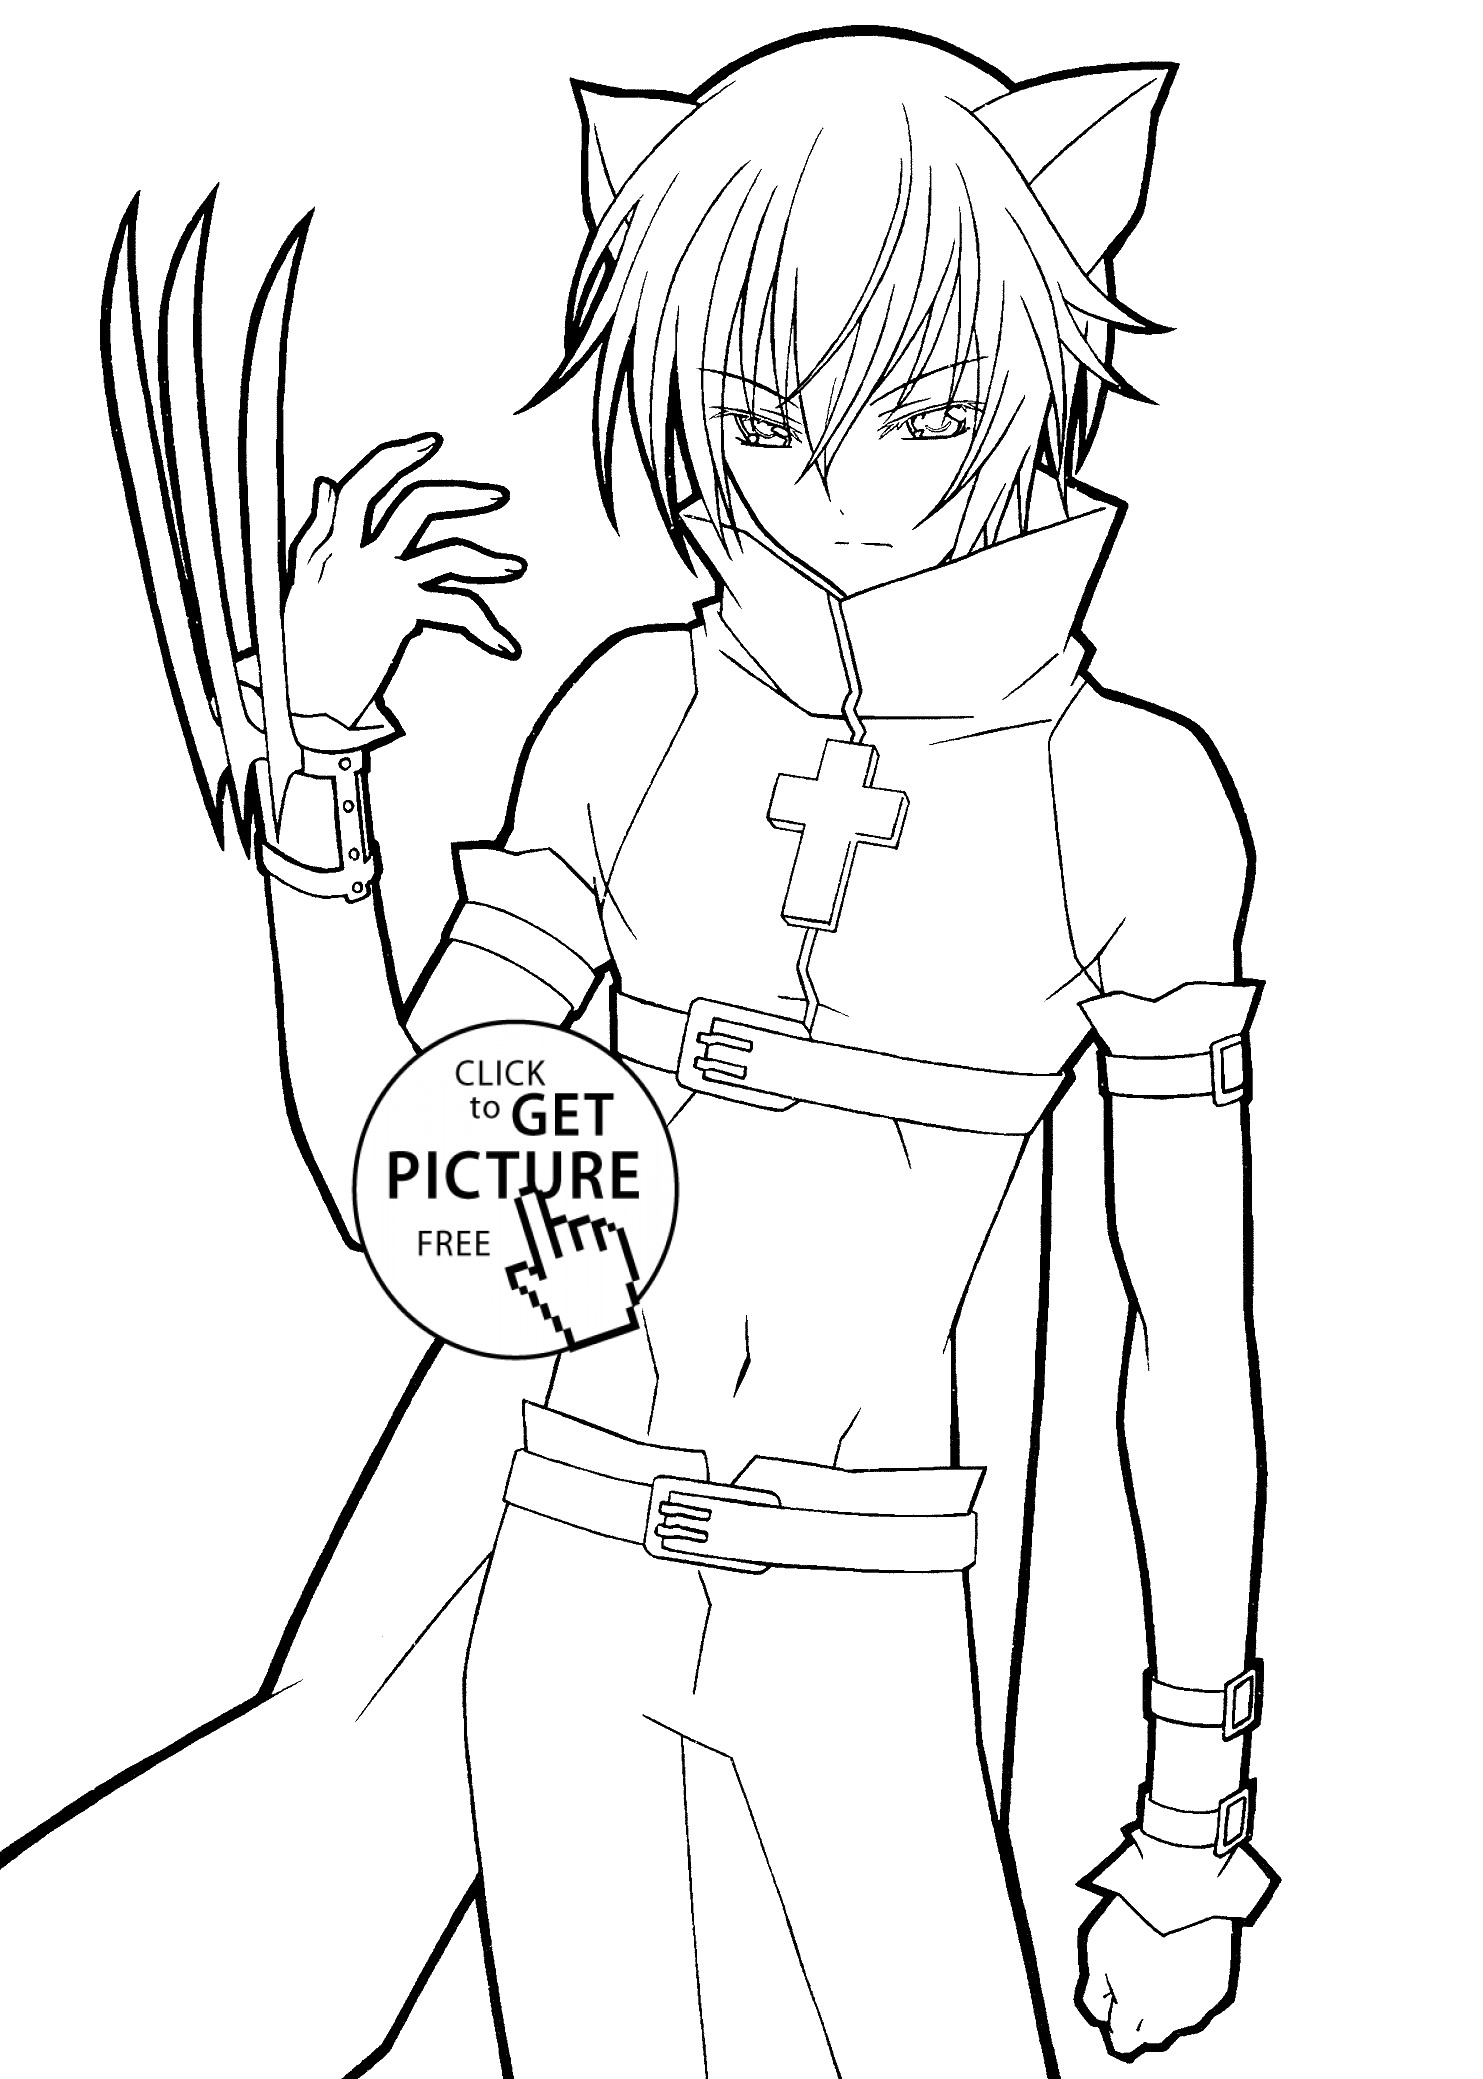 Hentai Coloring Pages
 Shugo chara catman anime coloring pages for kids